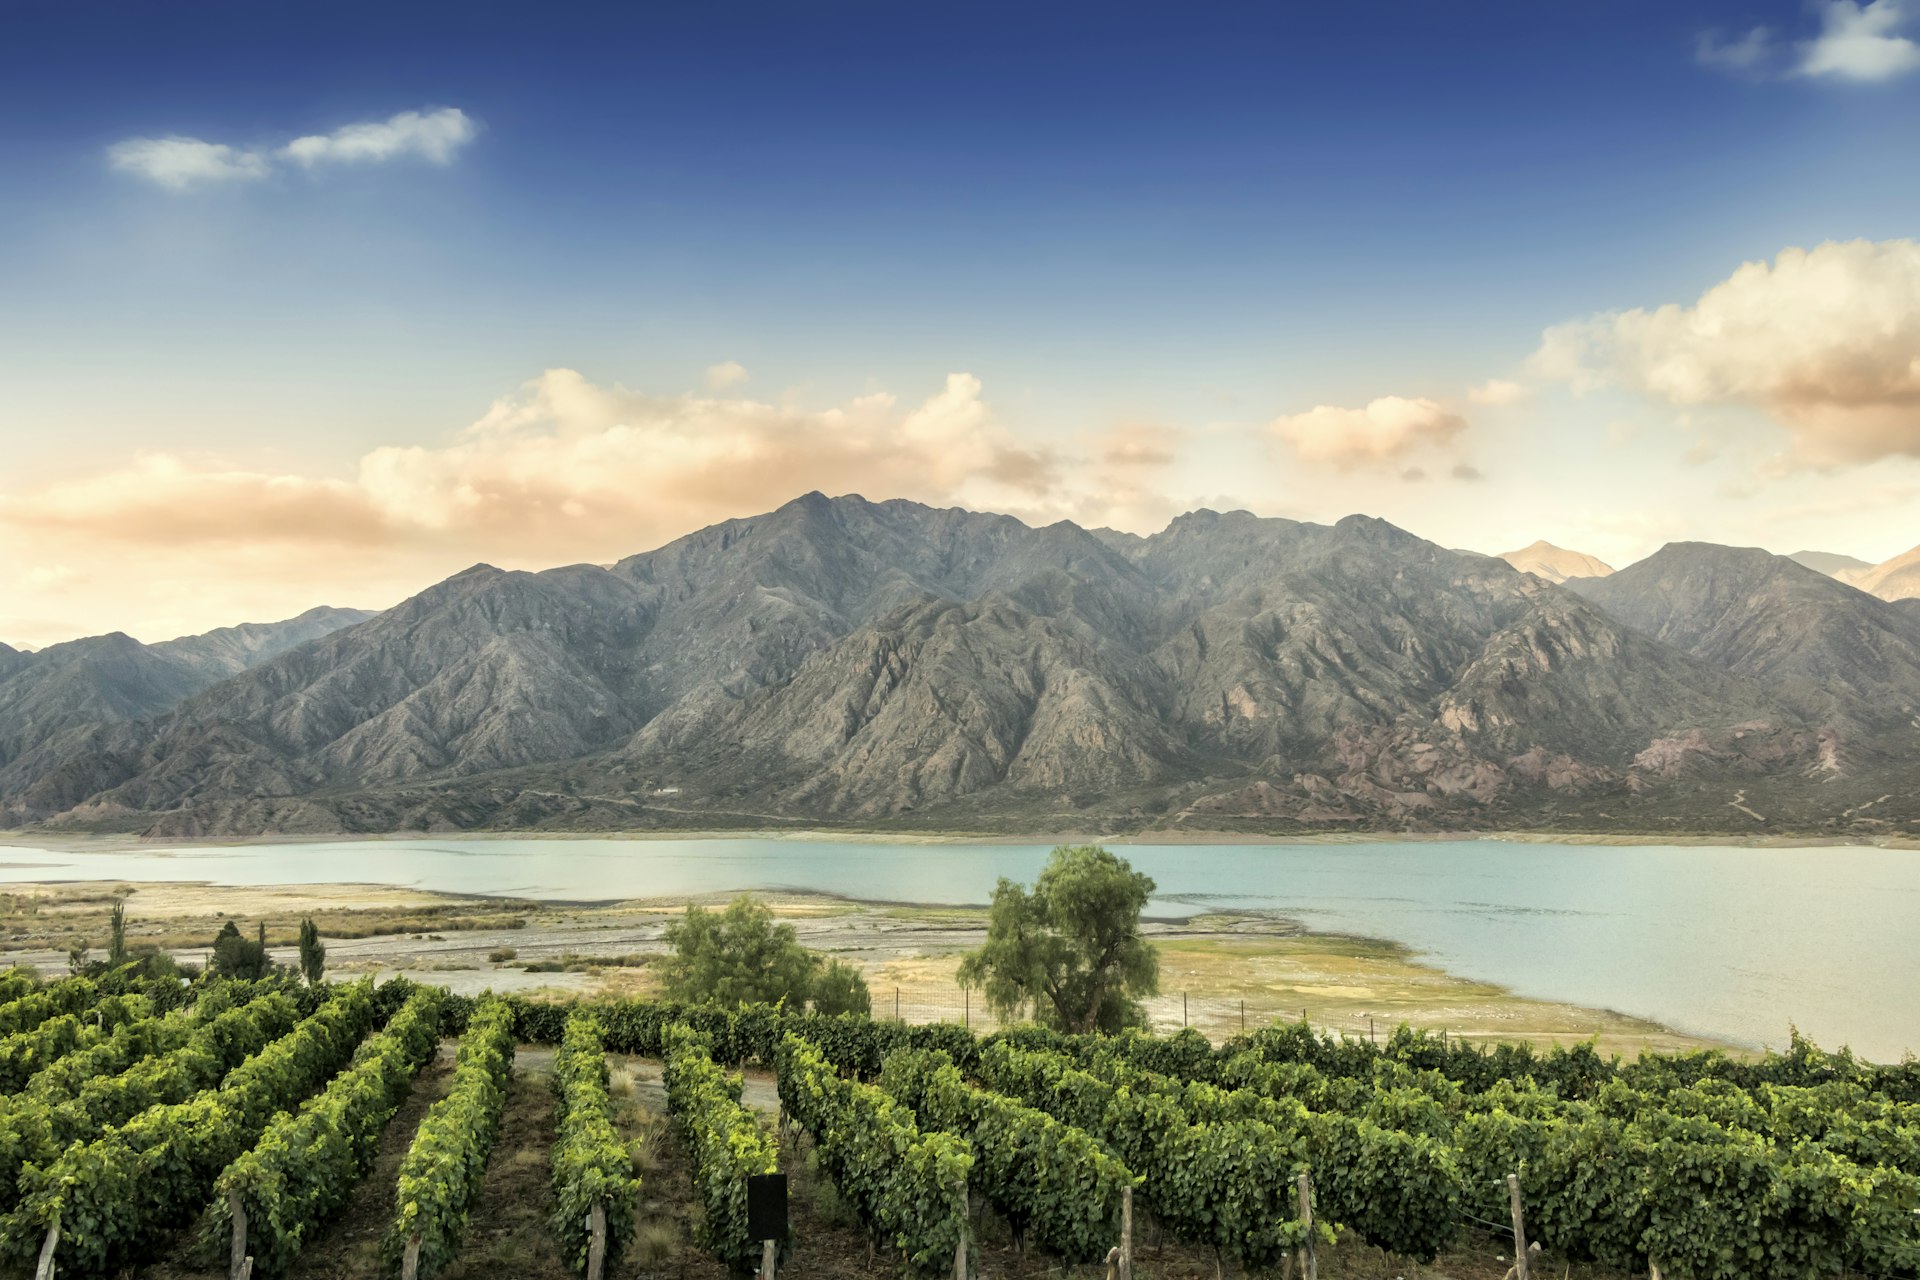 A vineyard in Mendoza, Argentina stretches out with a river and rugged mountain range in the background.